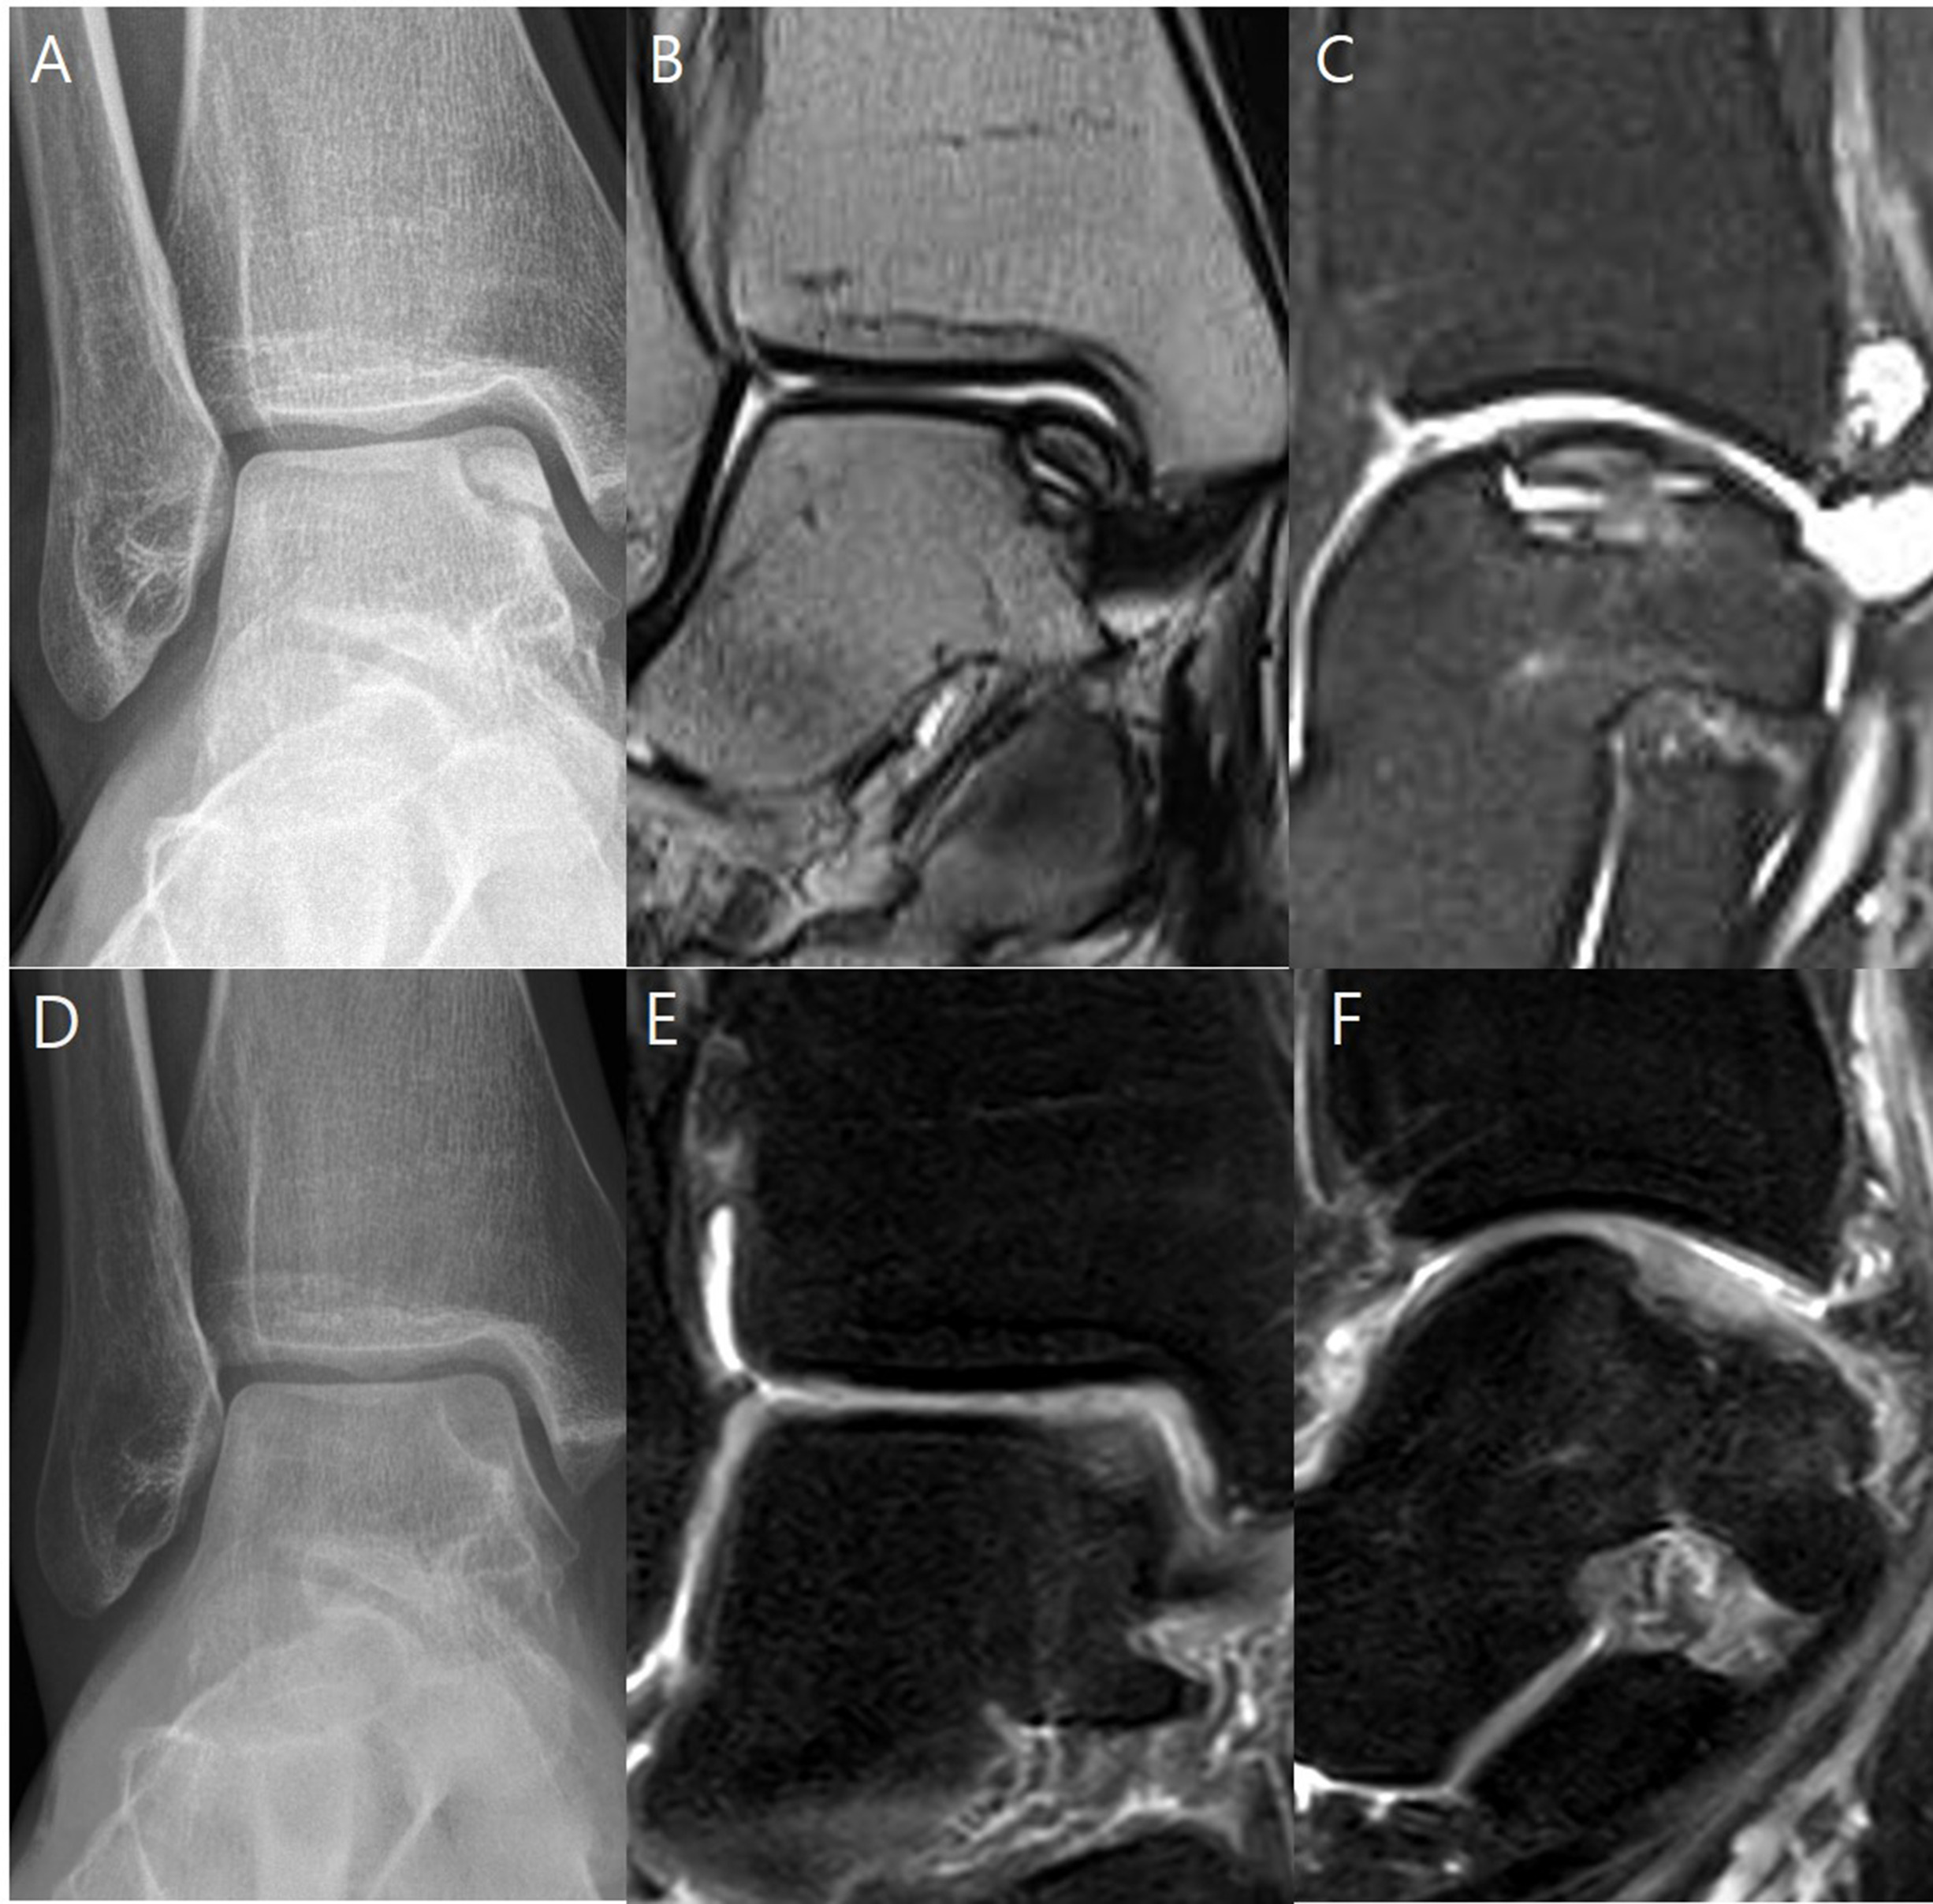 Fig. 3 
          a, b, and c) Preoperative standing anteroposterior radiograph and MRI scans of a 20-year-old female patient showing a completely detached osteochondral lesion (10 mm width, 20 mm length) on the medial talar dome. d, e, and f) 11-month postoperative images showing restoration of the lesion with homogenous cartilage well integrated with the surrounding cartilage. Note the reduced joint fluid in the postoperative MRI (f) compared to the preoperative image (c).
        